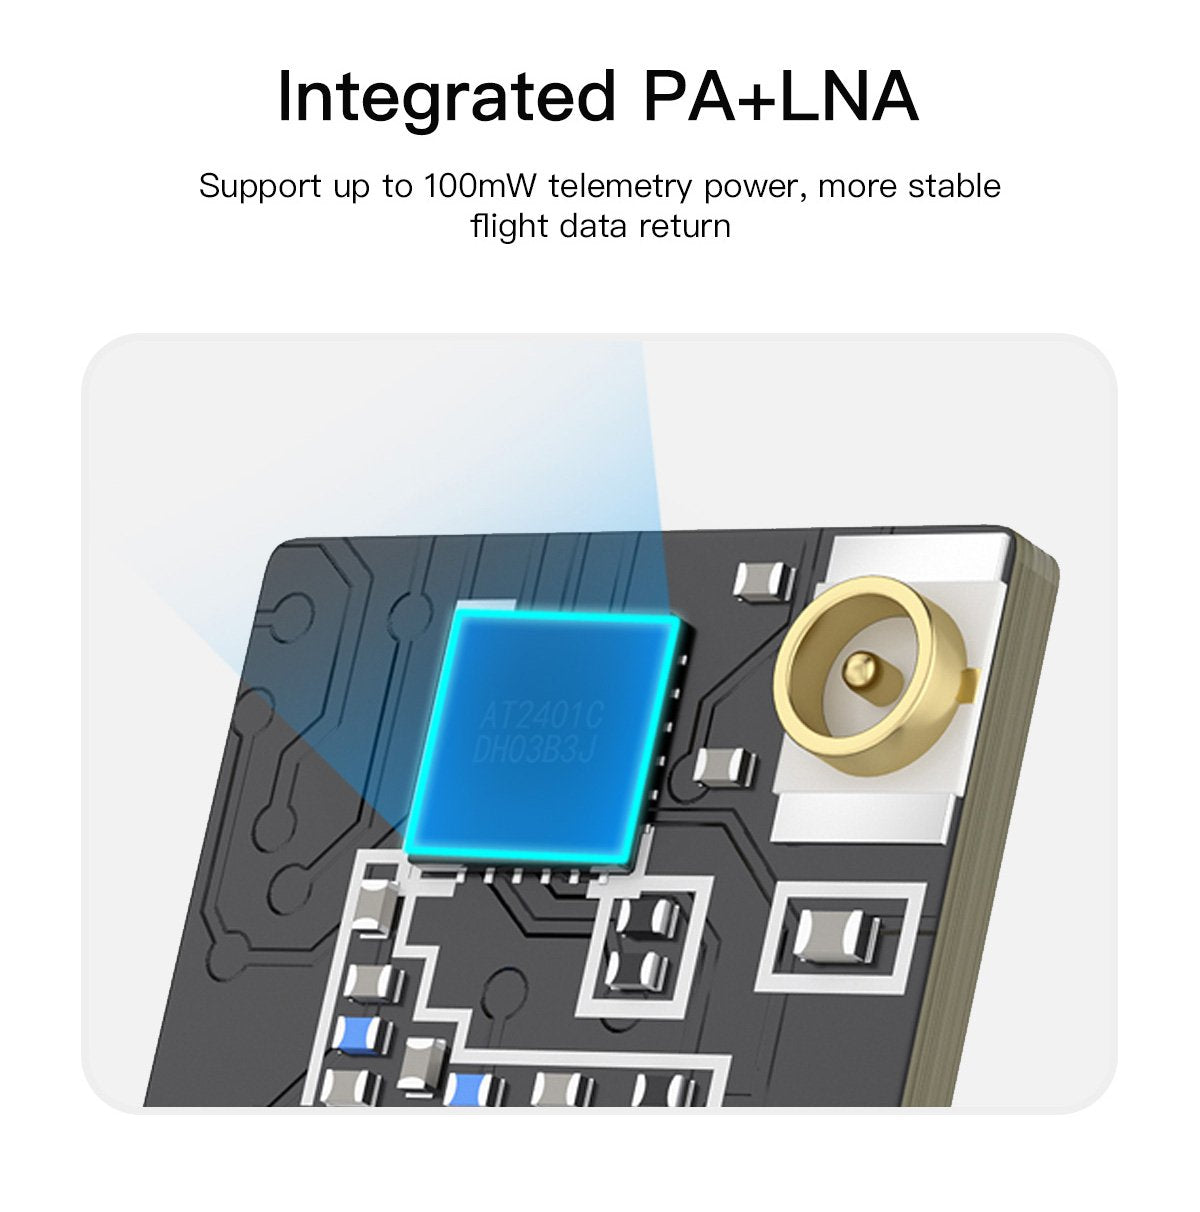 Integrated PA+LNA Support up to 1OOmW telemetry power, more